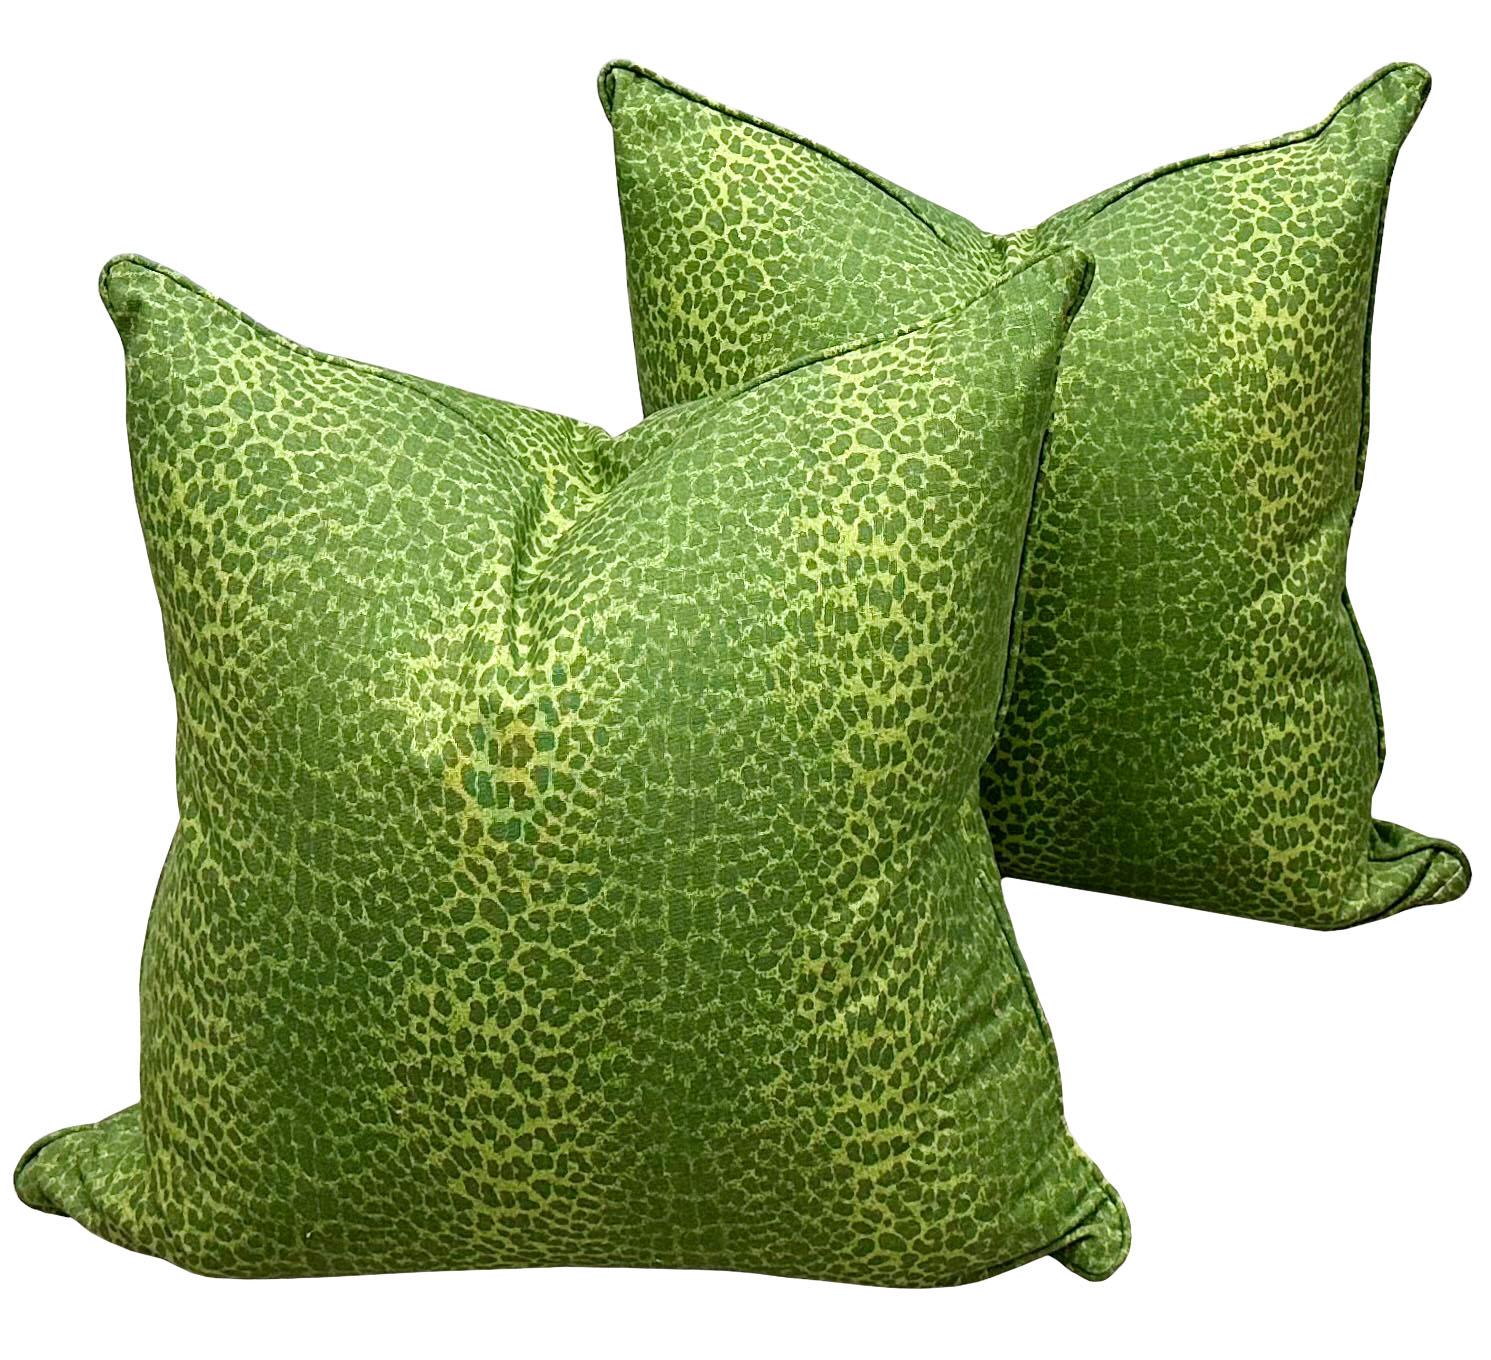 A fabulous pair of 1970s designer pillows in a vibrant green linen and cotton fabric. These unique pillows are perfect for adding an extra pop of color.